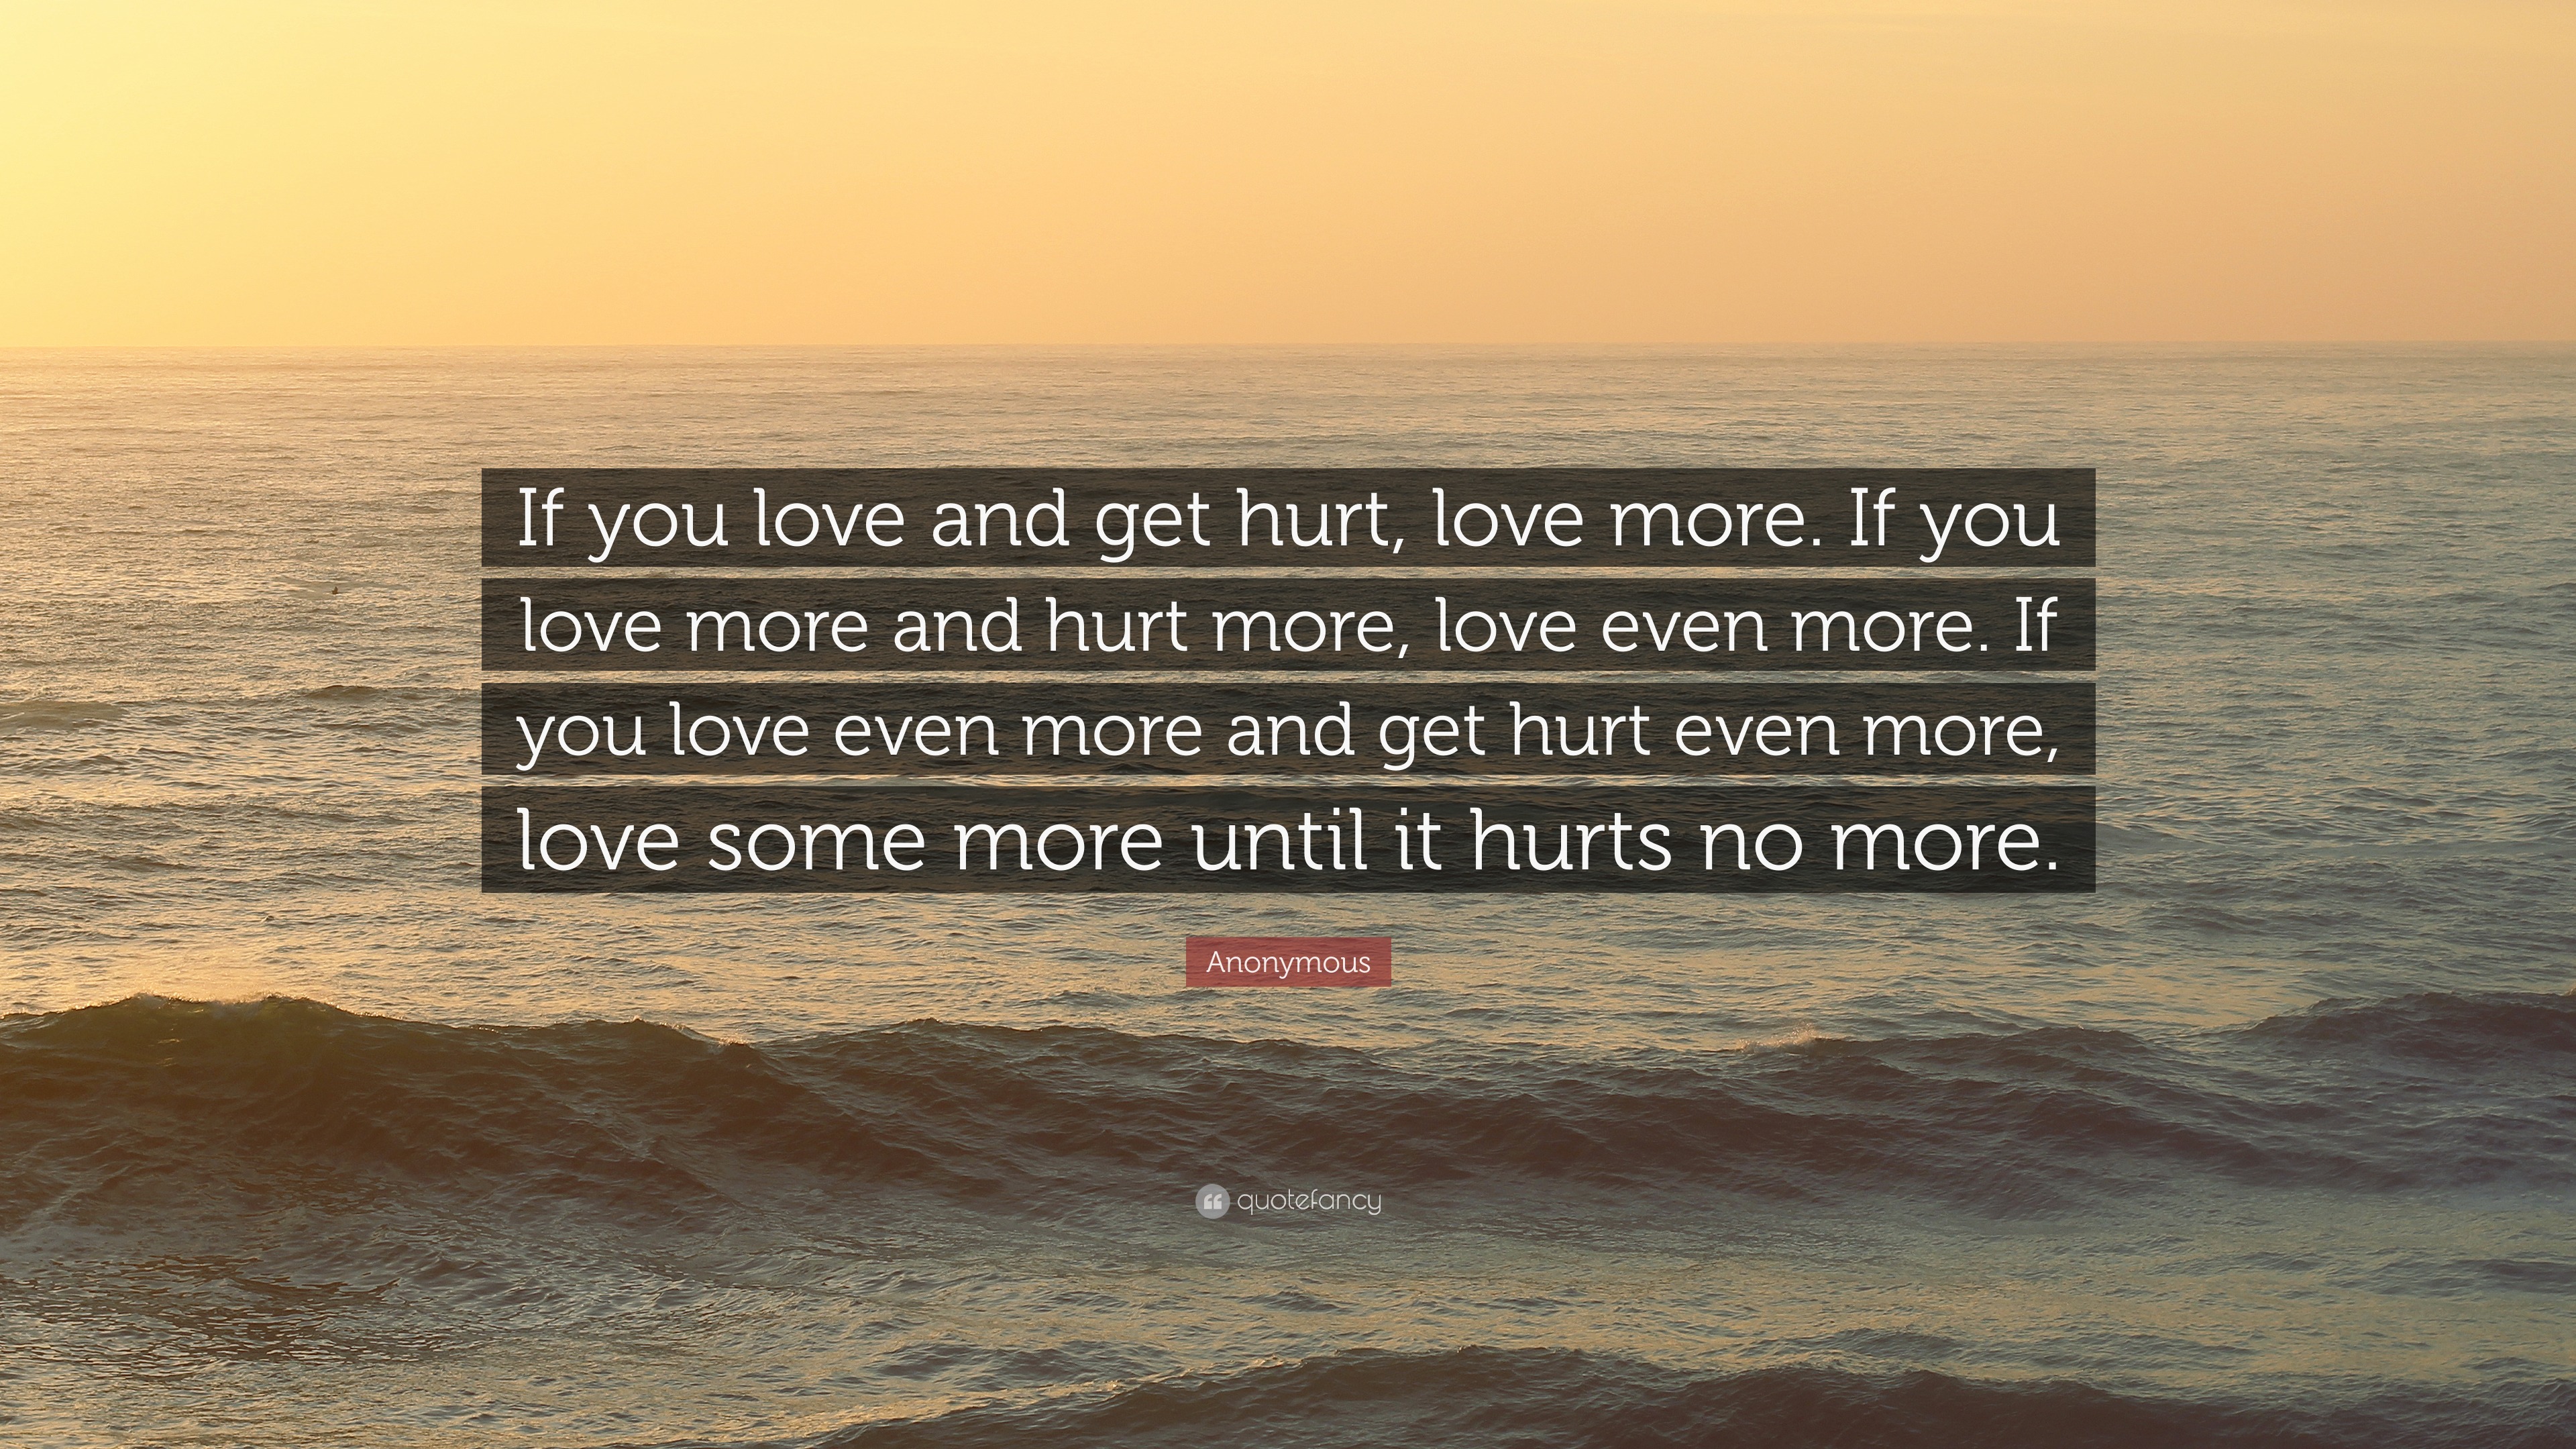 William Shakespeare Quote “If you love and hurt love more If